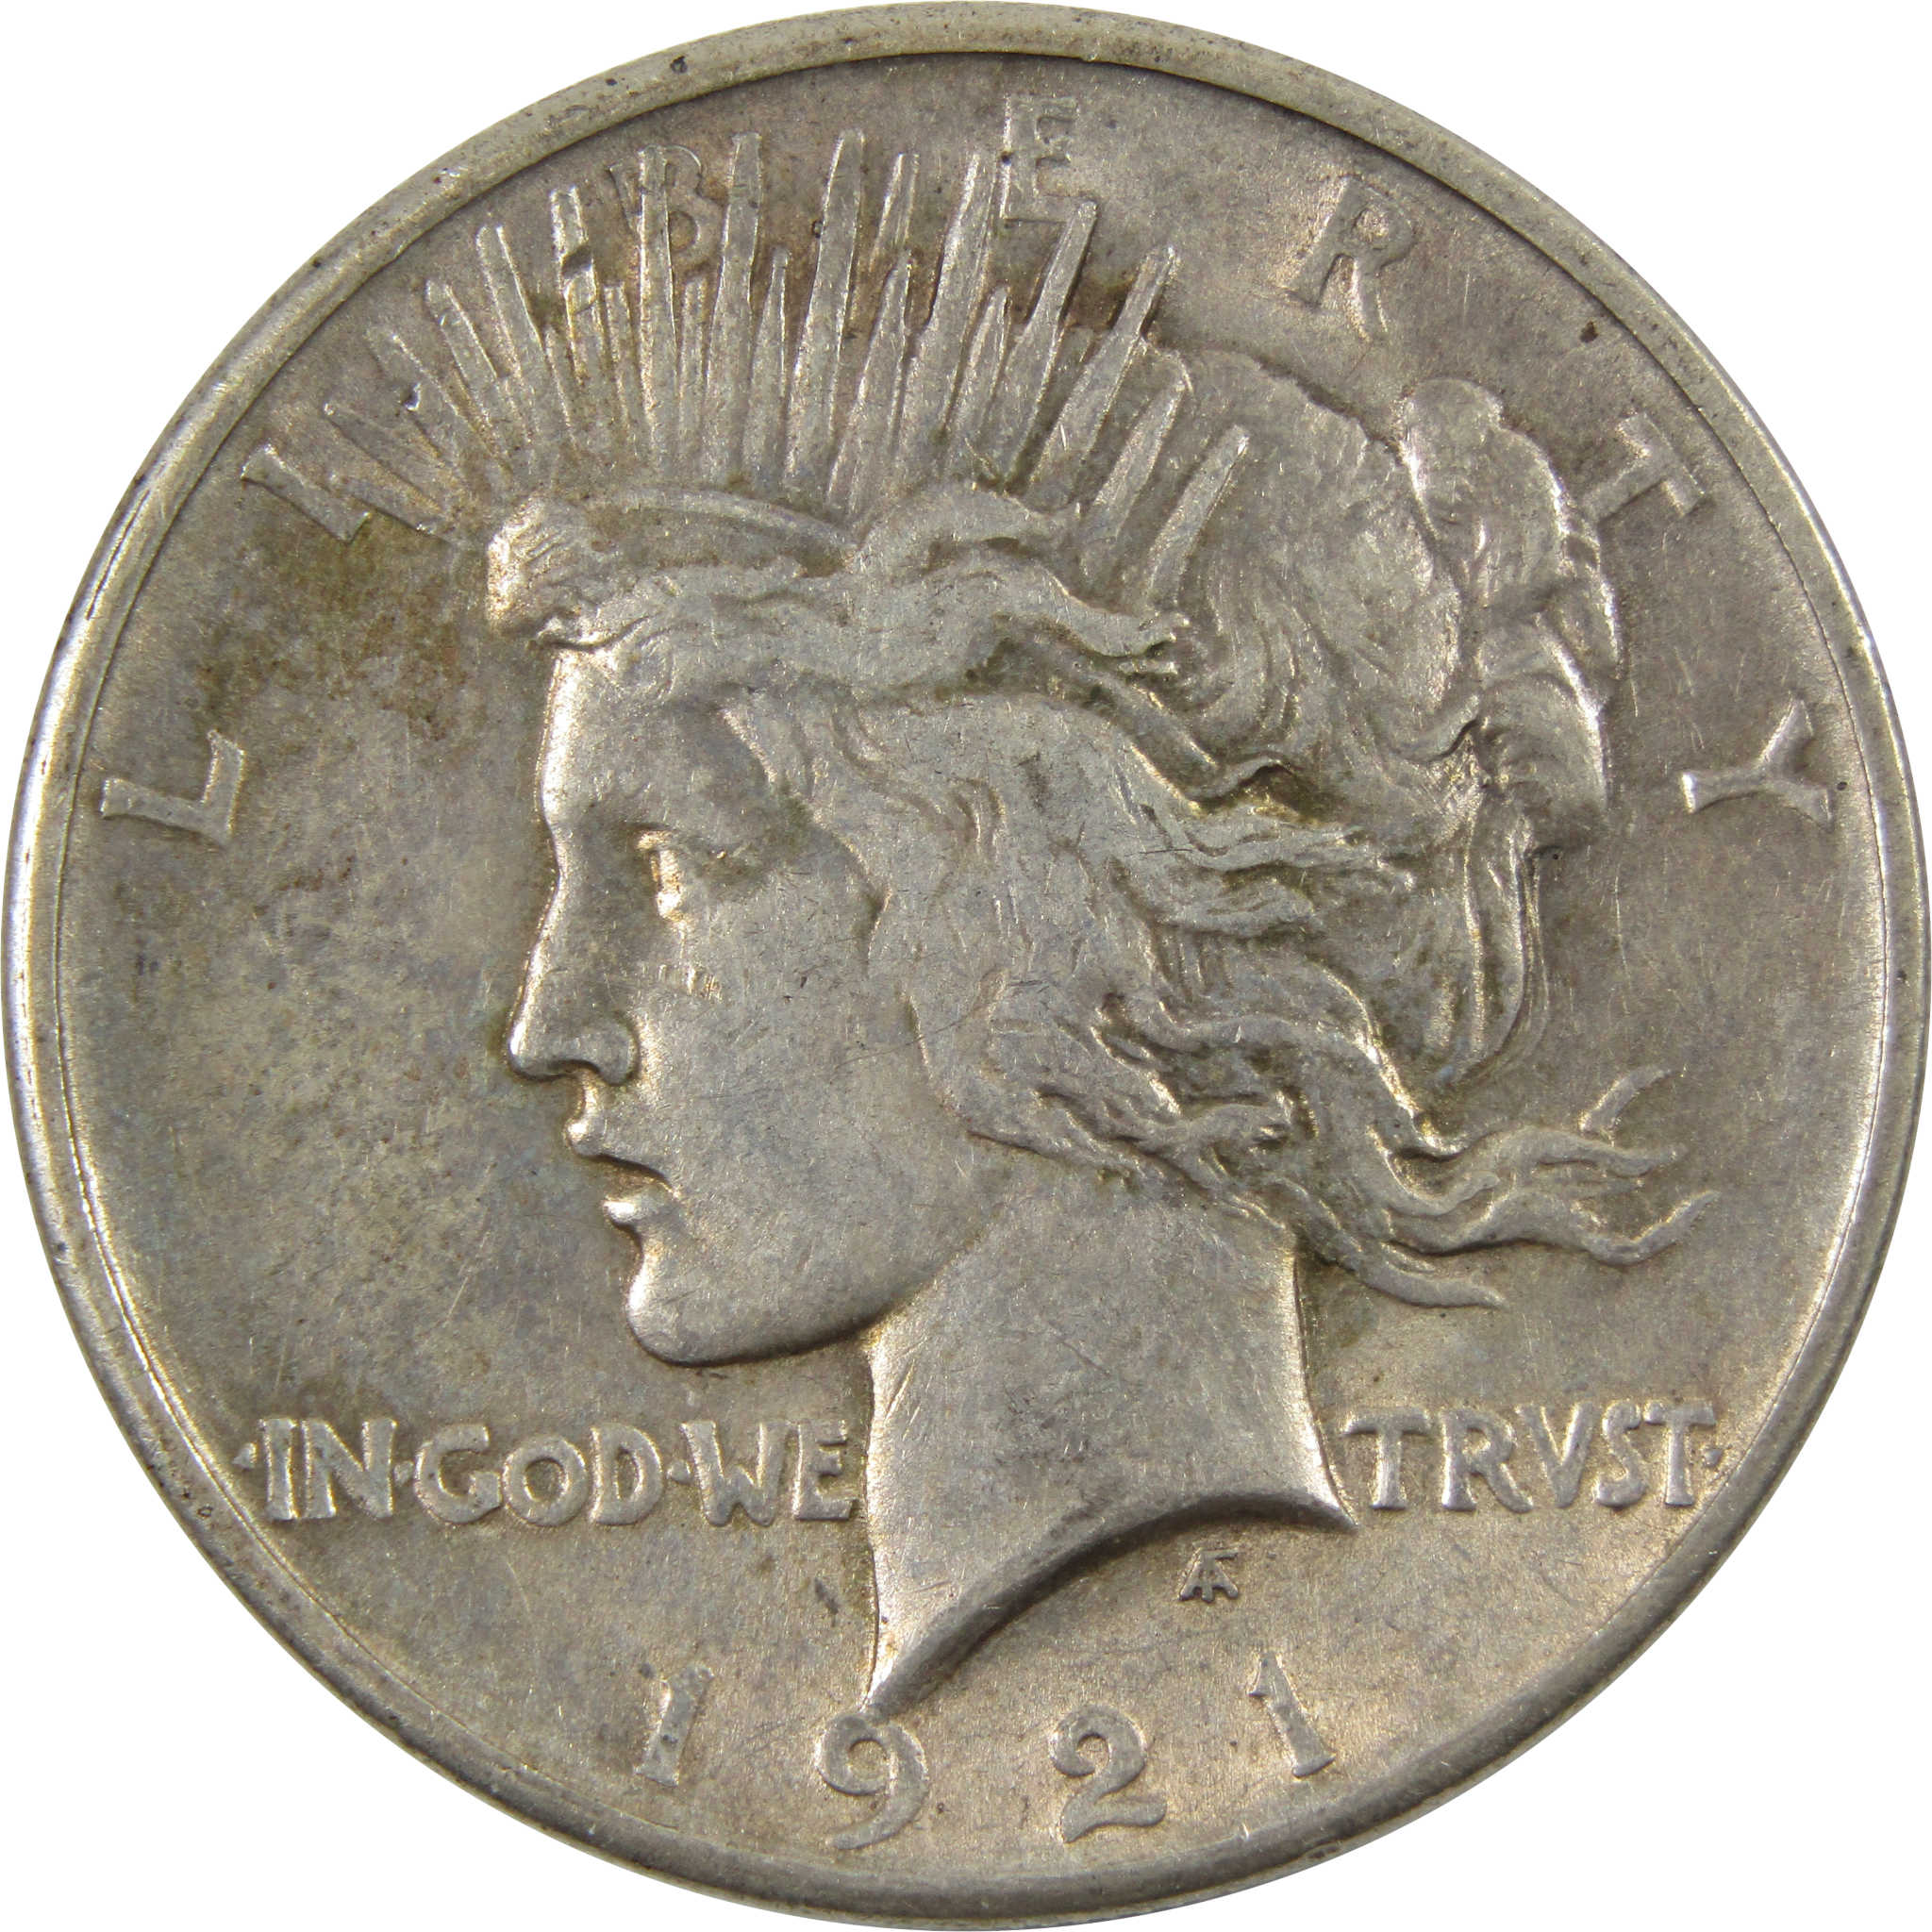 1921 High Relief Peace Dollar XF EF Extremely Fine Silver $1 SKU:I9636